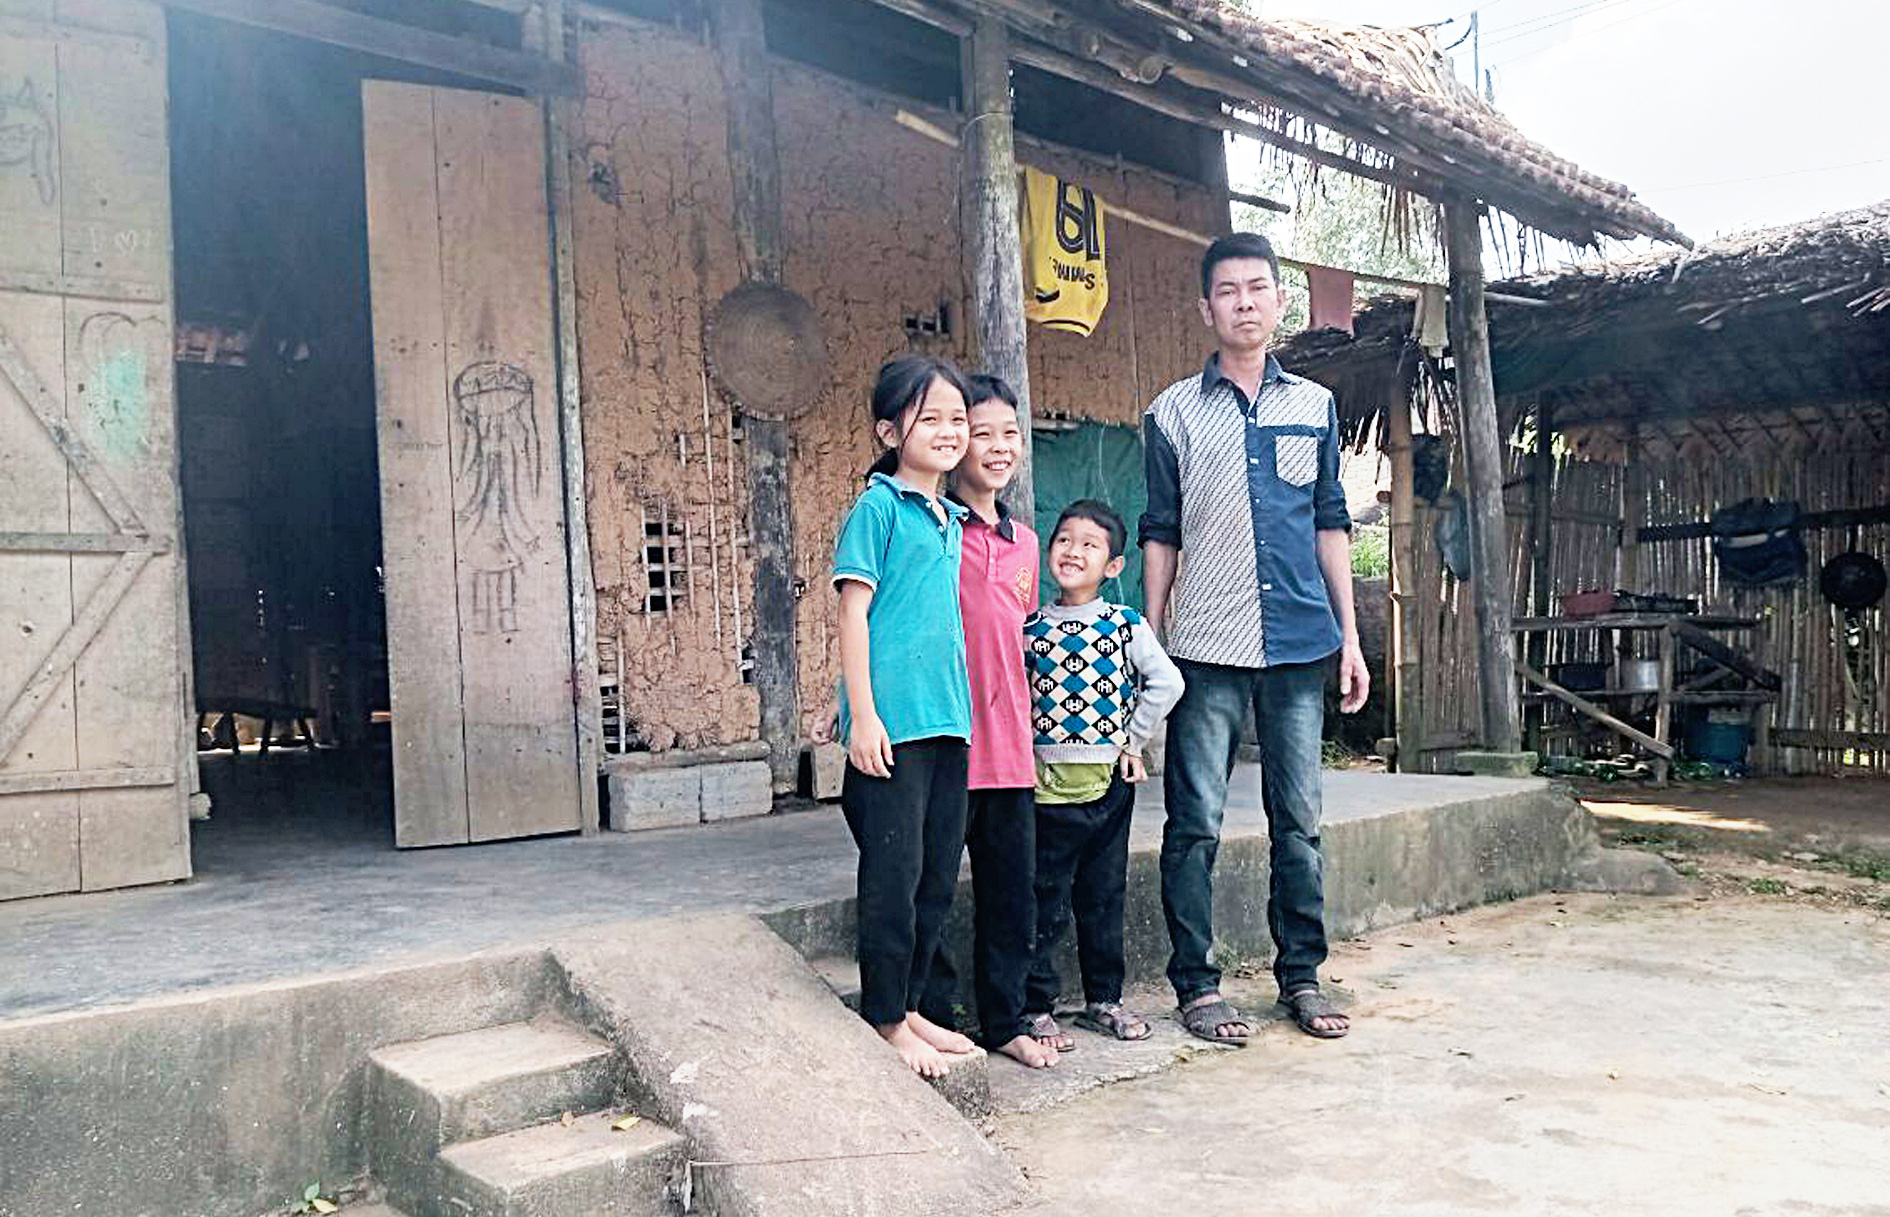 Thanh Long, Ngoc Hoa, and Minh Tan with their deceased father when he was still alive. Photo: Supplied